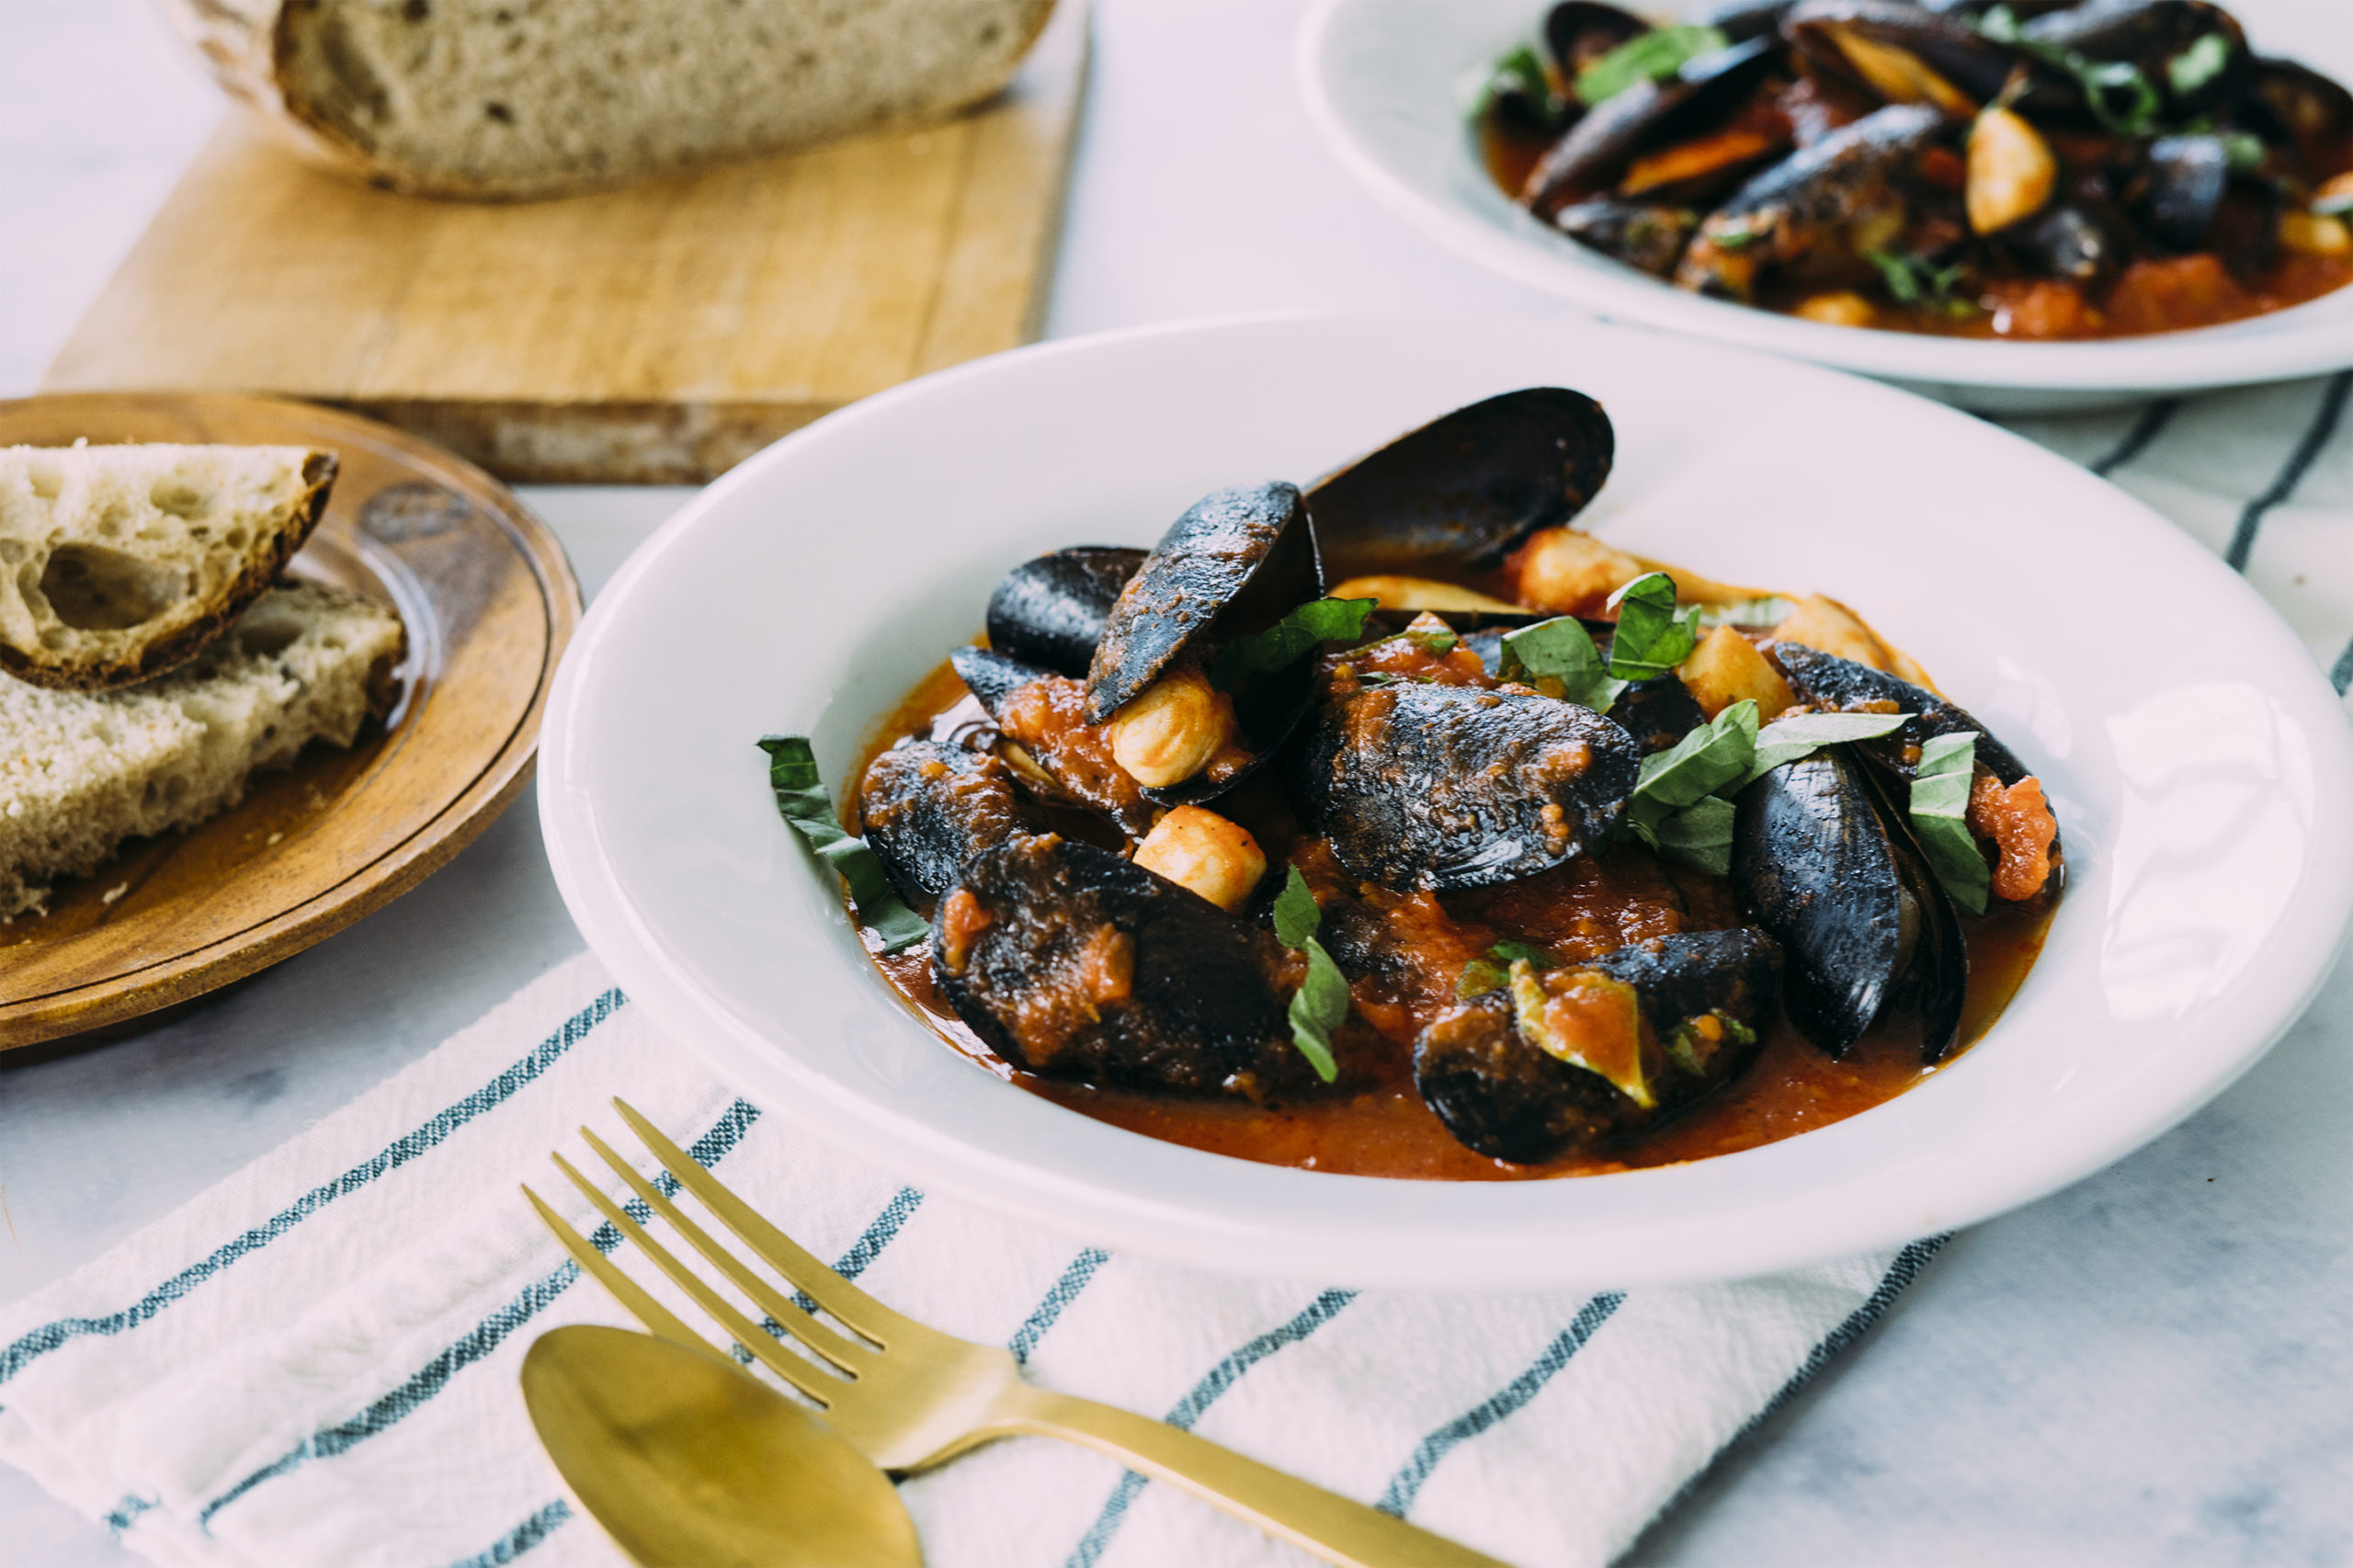 Scallops, Mussels and Potatoes in Tomato Broth Recipe